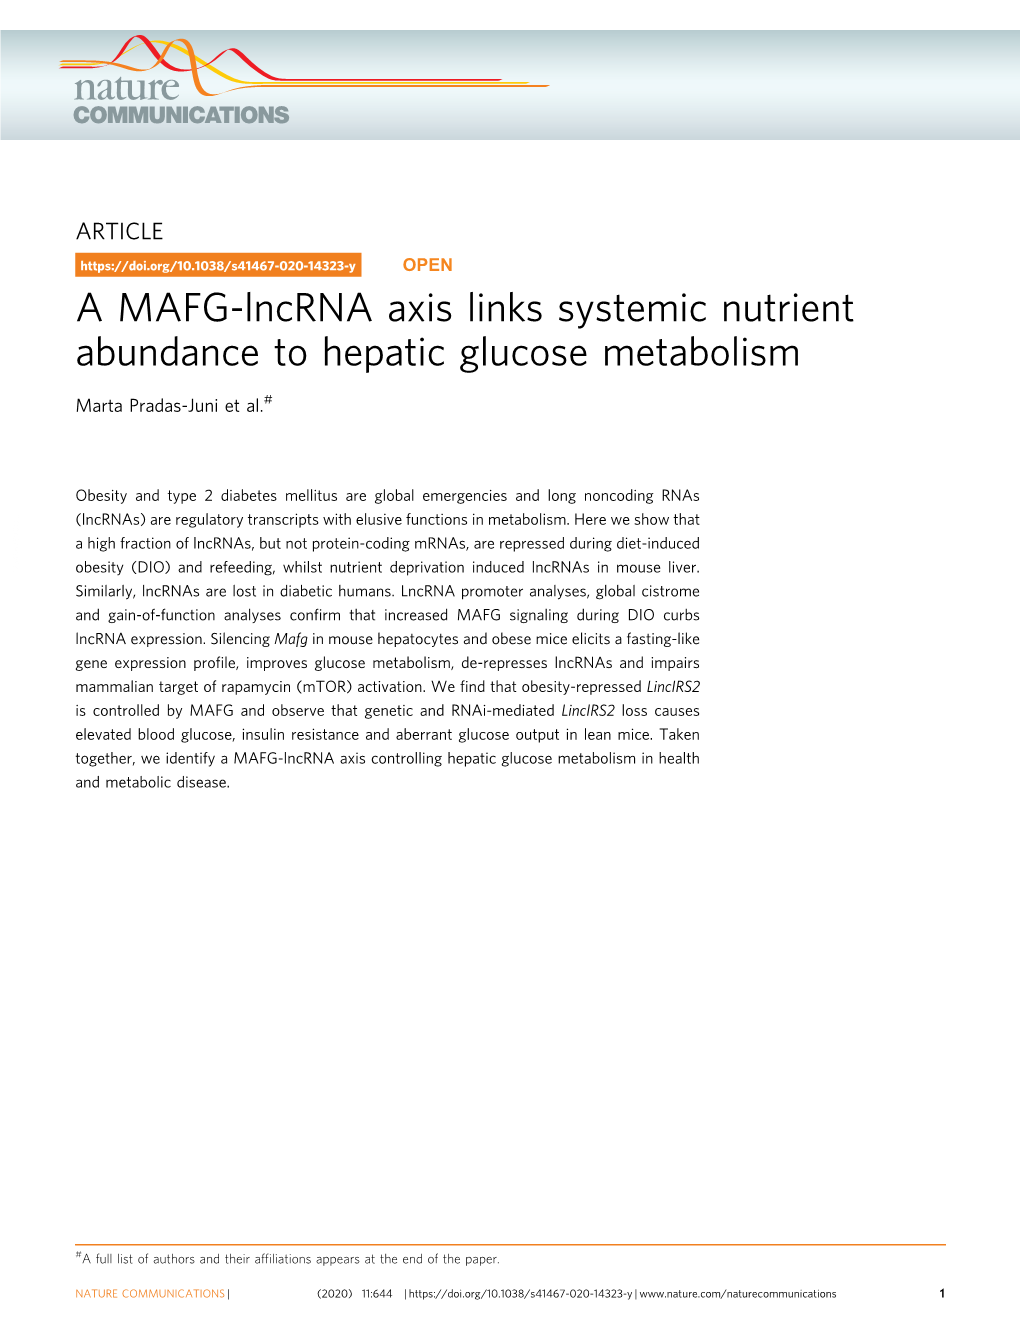 A MAFG-Lncrna Axis Links Systemic Nutrient Abundance to Hepatic Glucose Metabolism